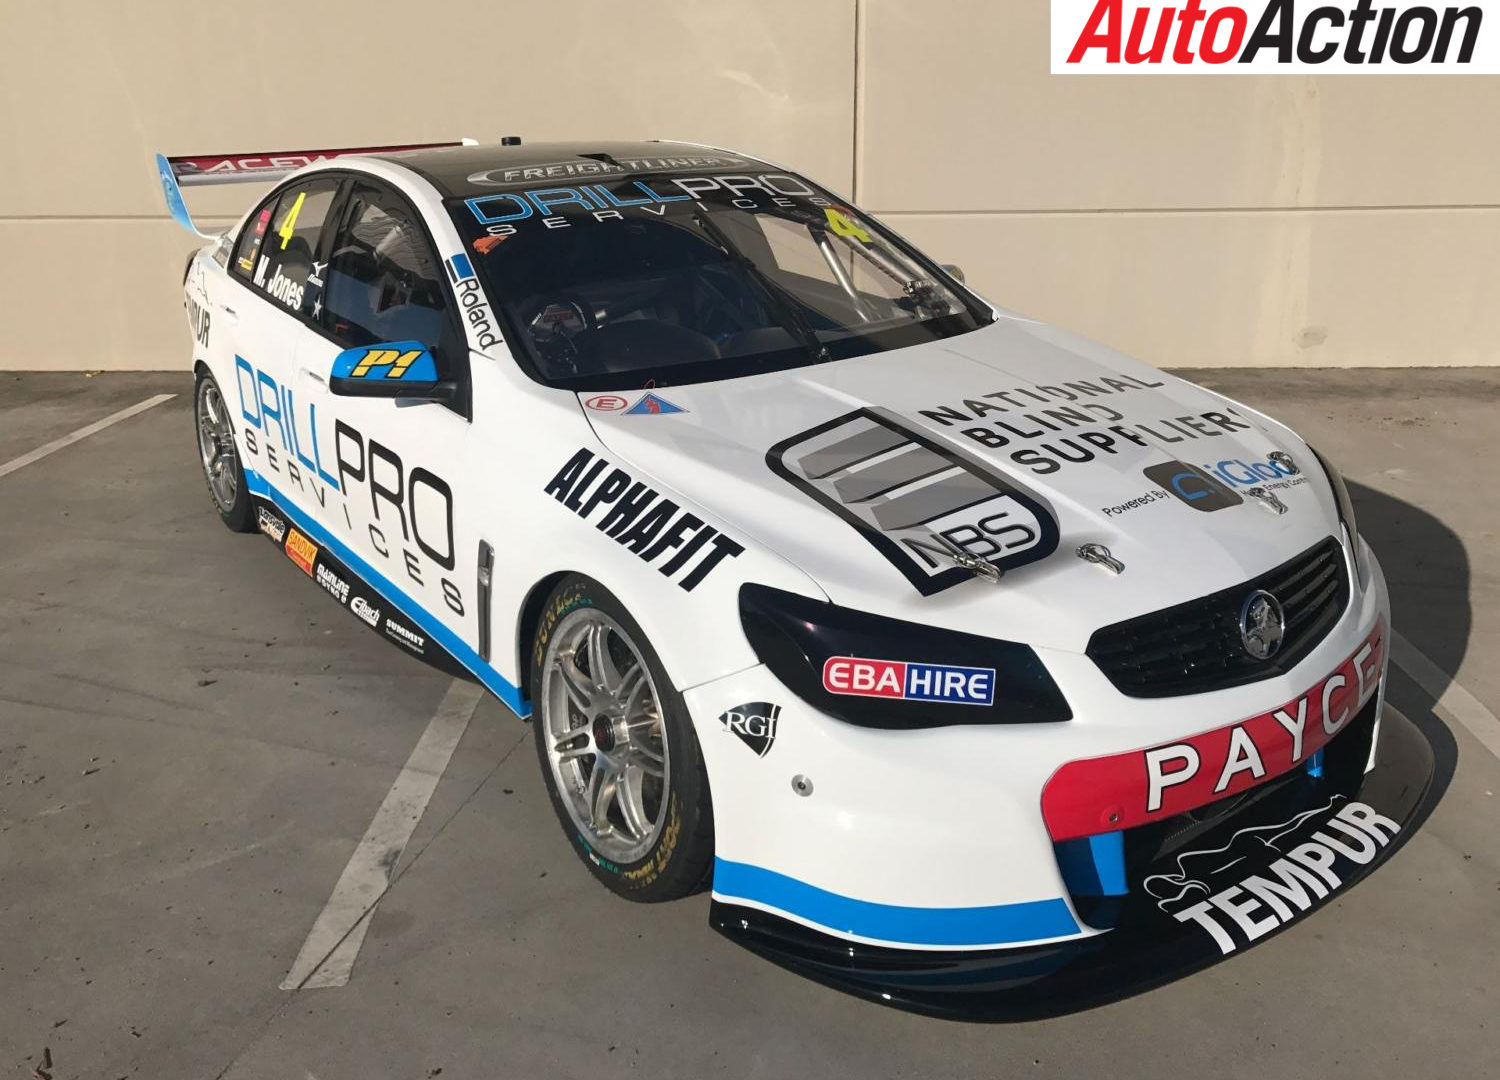 Macauley Jones's DrillPro Racing Commodore for Supercars at Winton - Photo: Supplied